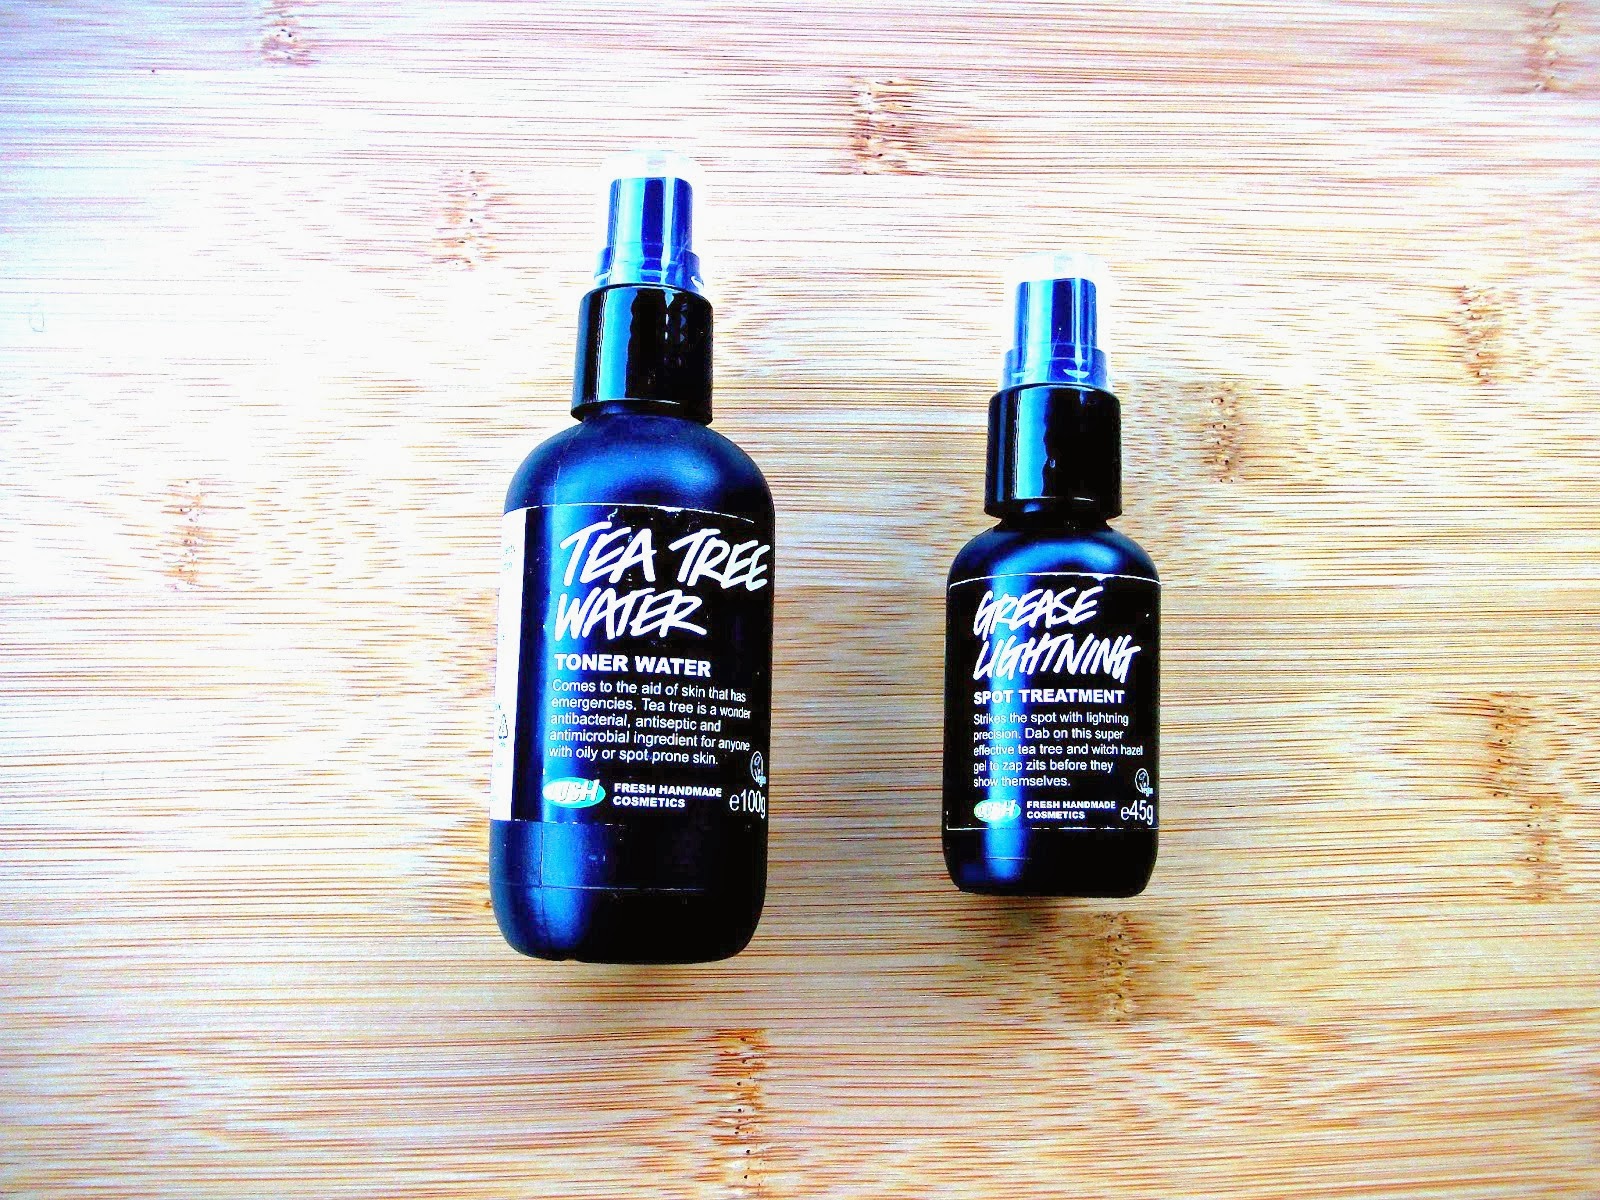 parti Orkan Stræde FashStyleLiv: Lush Tea Tree Toner and Lush Grease Lightning Spot Treatment  Review